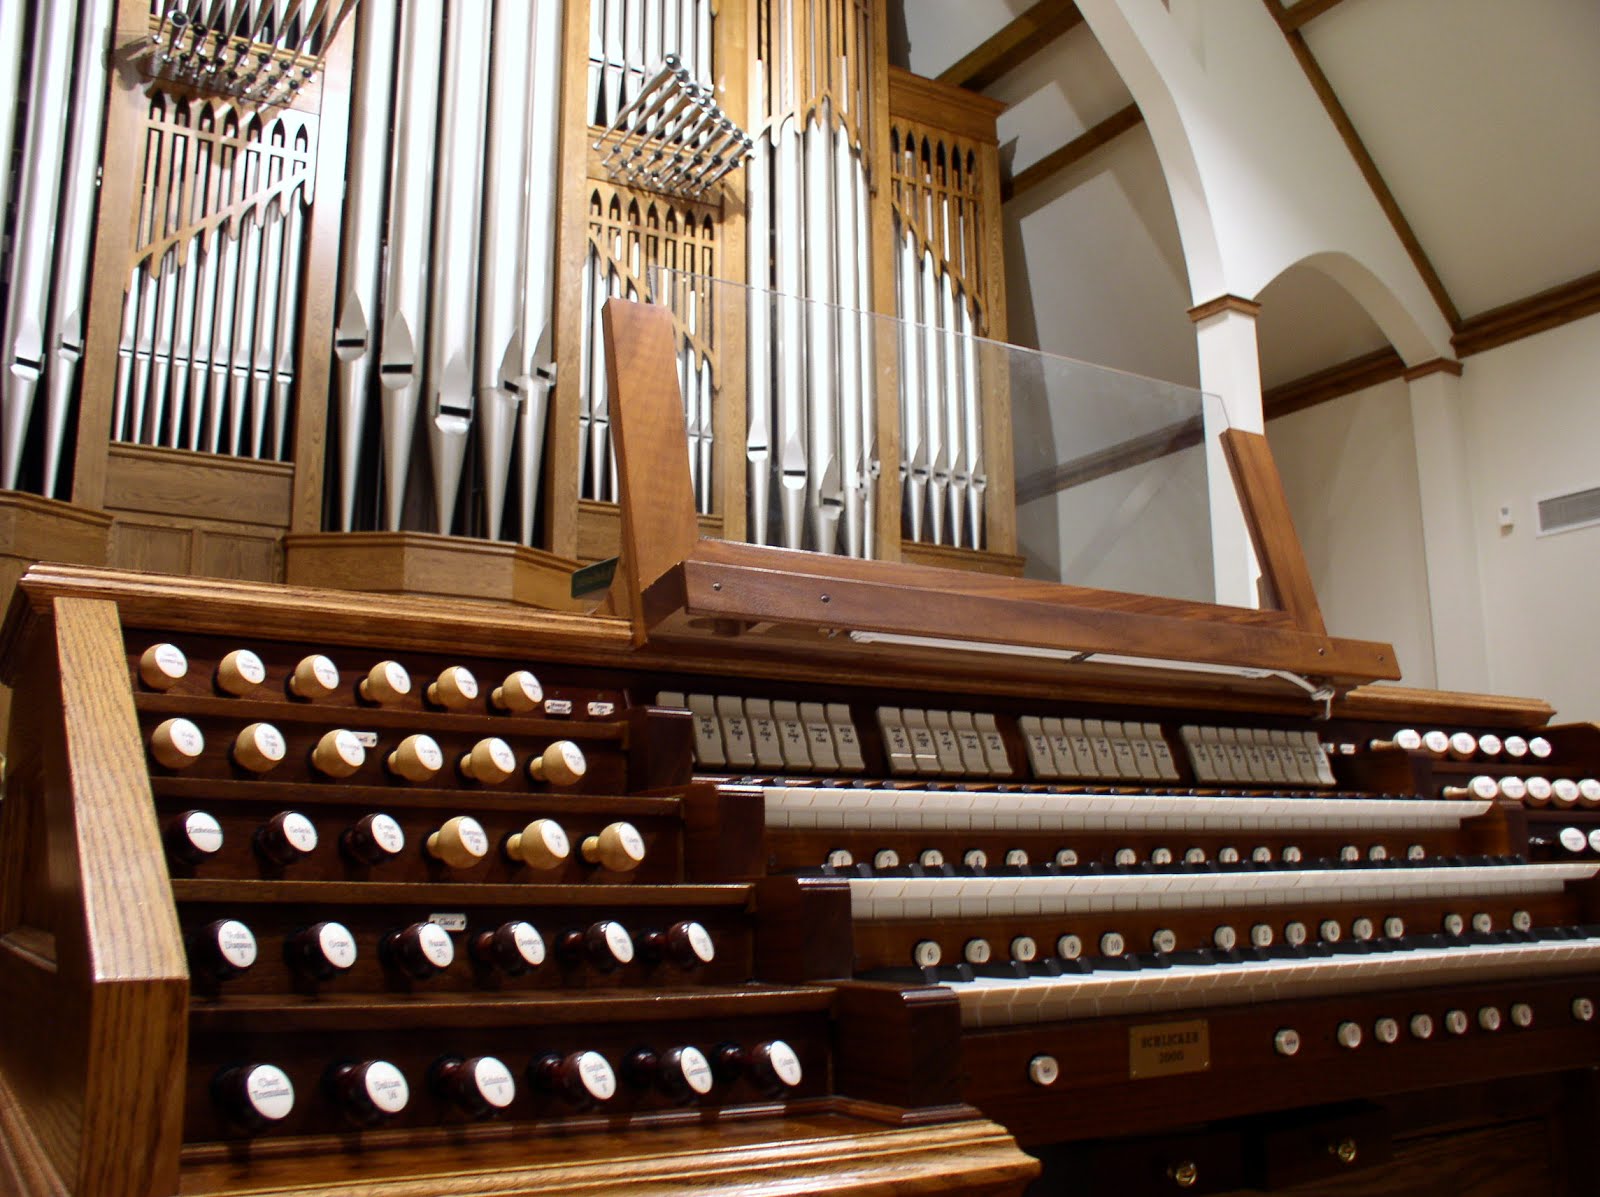 Puddles of Myself: Failed Letter of Recommendation: The Pipe Organ